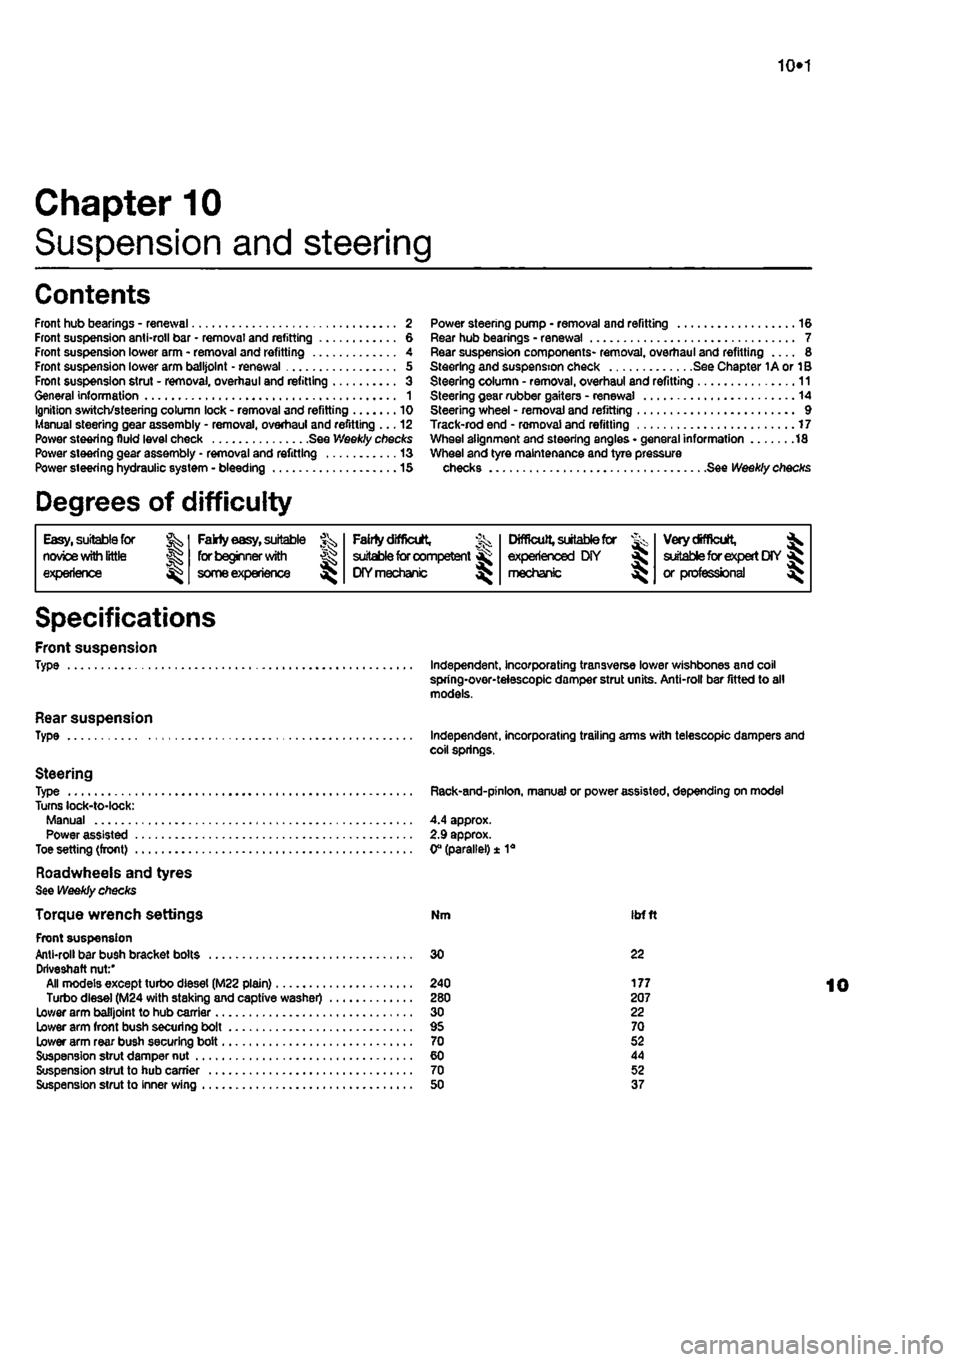 FIAT PUNTO 1996 176 / 1.G Manual PDF 
10*1 
Chapter 10 
Suspension and steering 
Contents 
Front hub bearings - renewal 2 Front suspension anti-roll bar • removal and refitting 6 Front suspension lower arm - removal and refitting 4 Fro